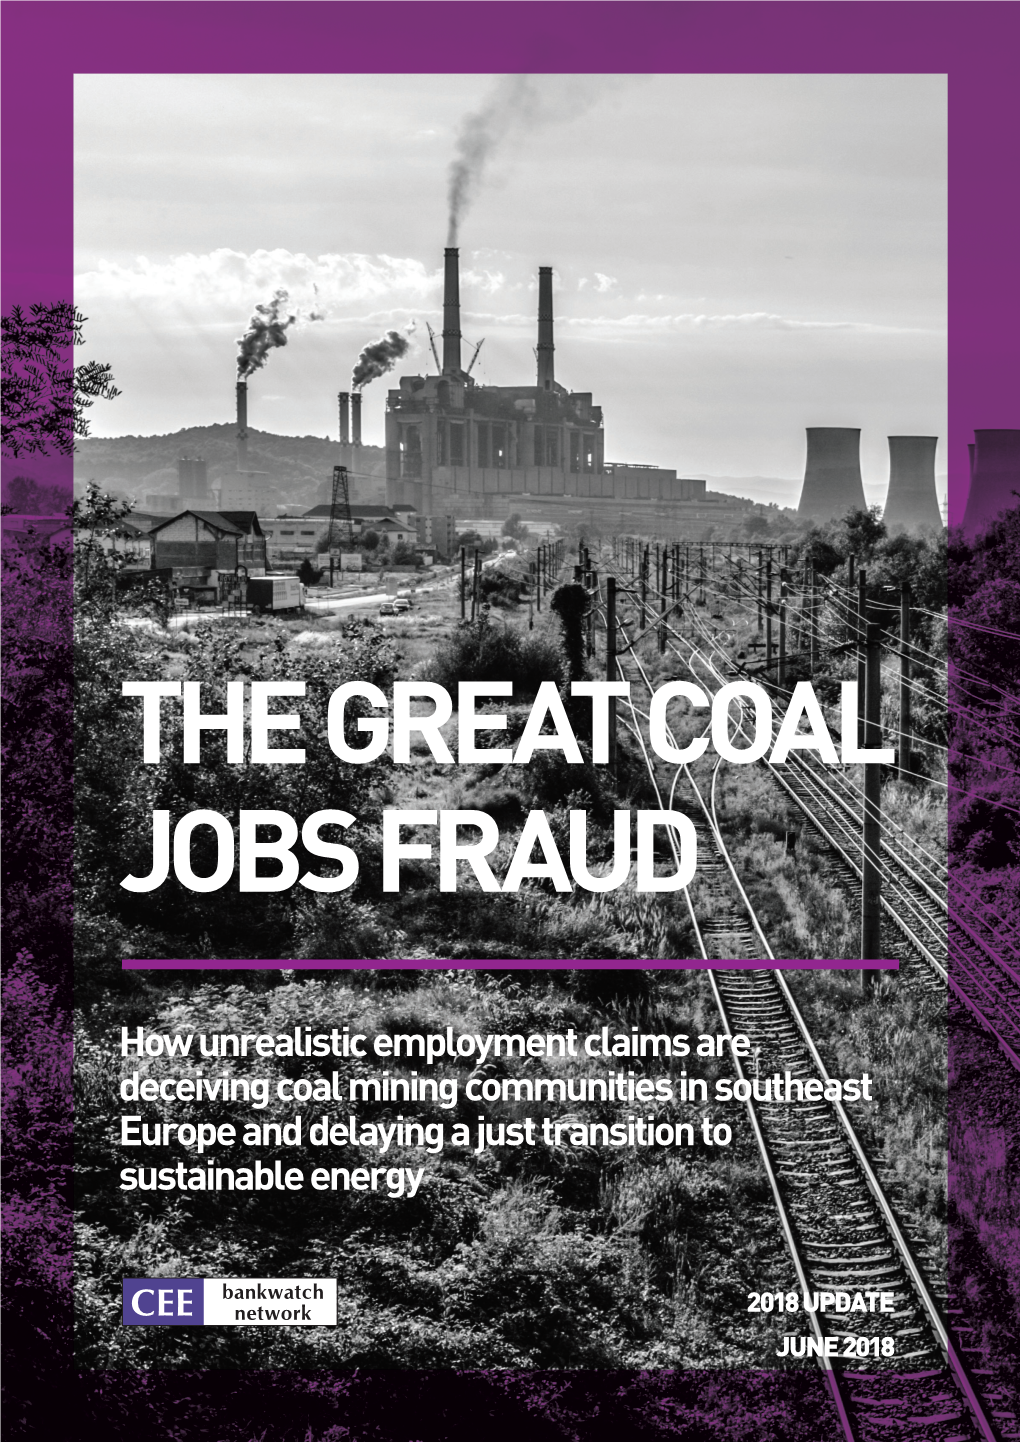 The Great Coal Jobs Fraud: 2018 Update Job Claims for New Plants Compared with Our Findings